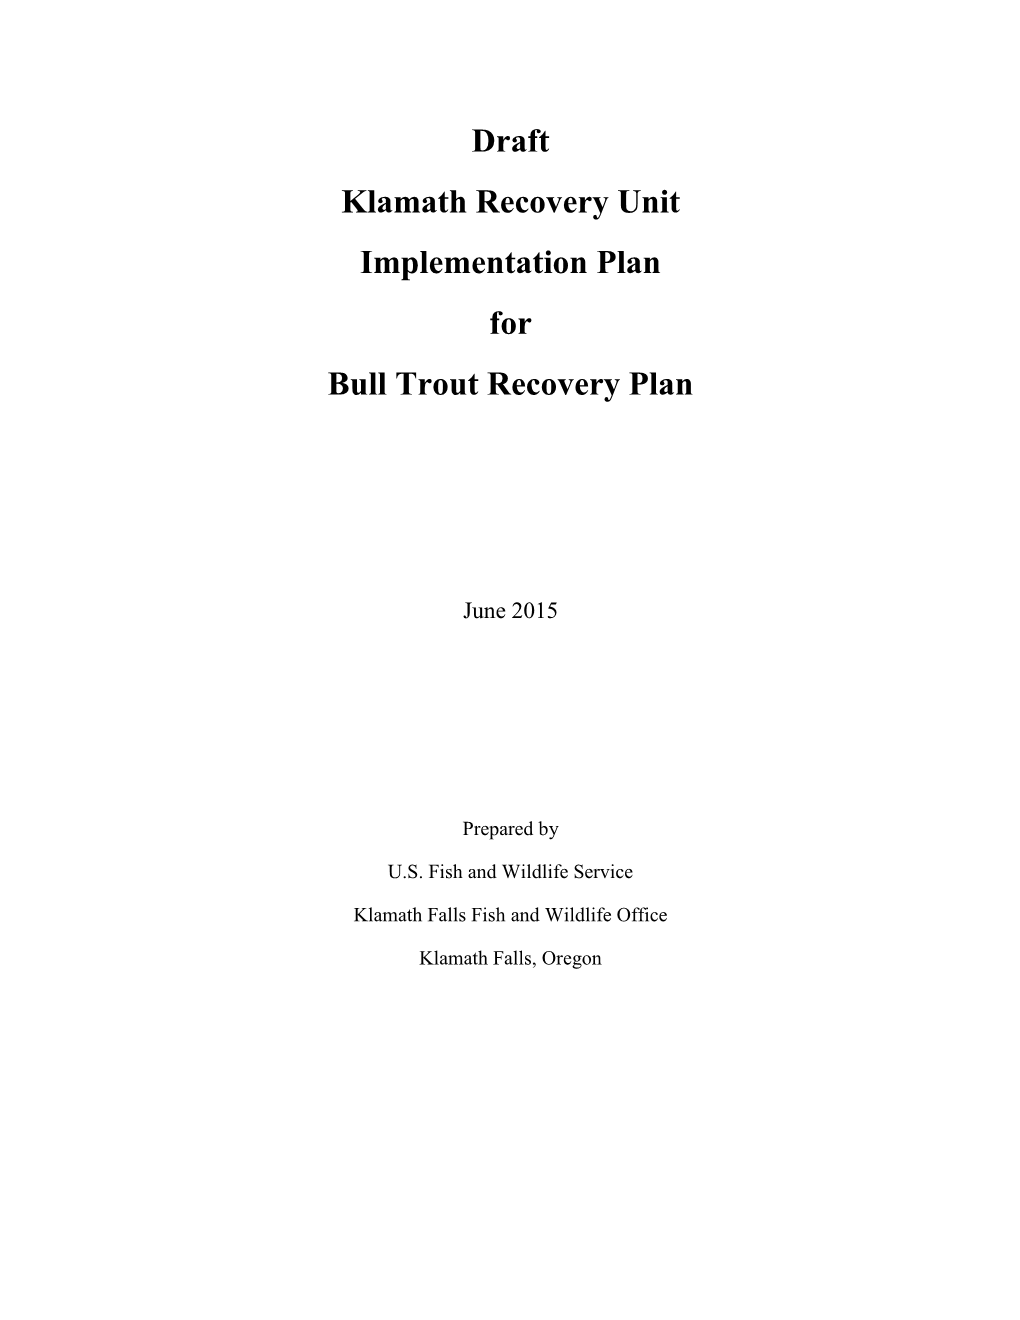 Draft Klamath Recovery Unit Implementation Plan for Bull Trout Recovery Plan